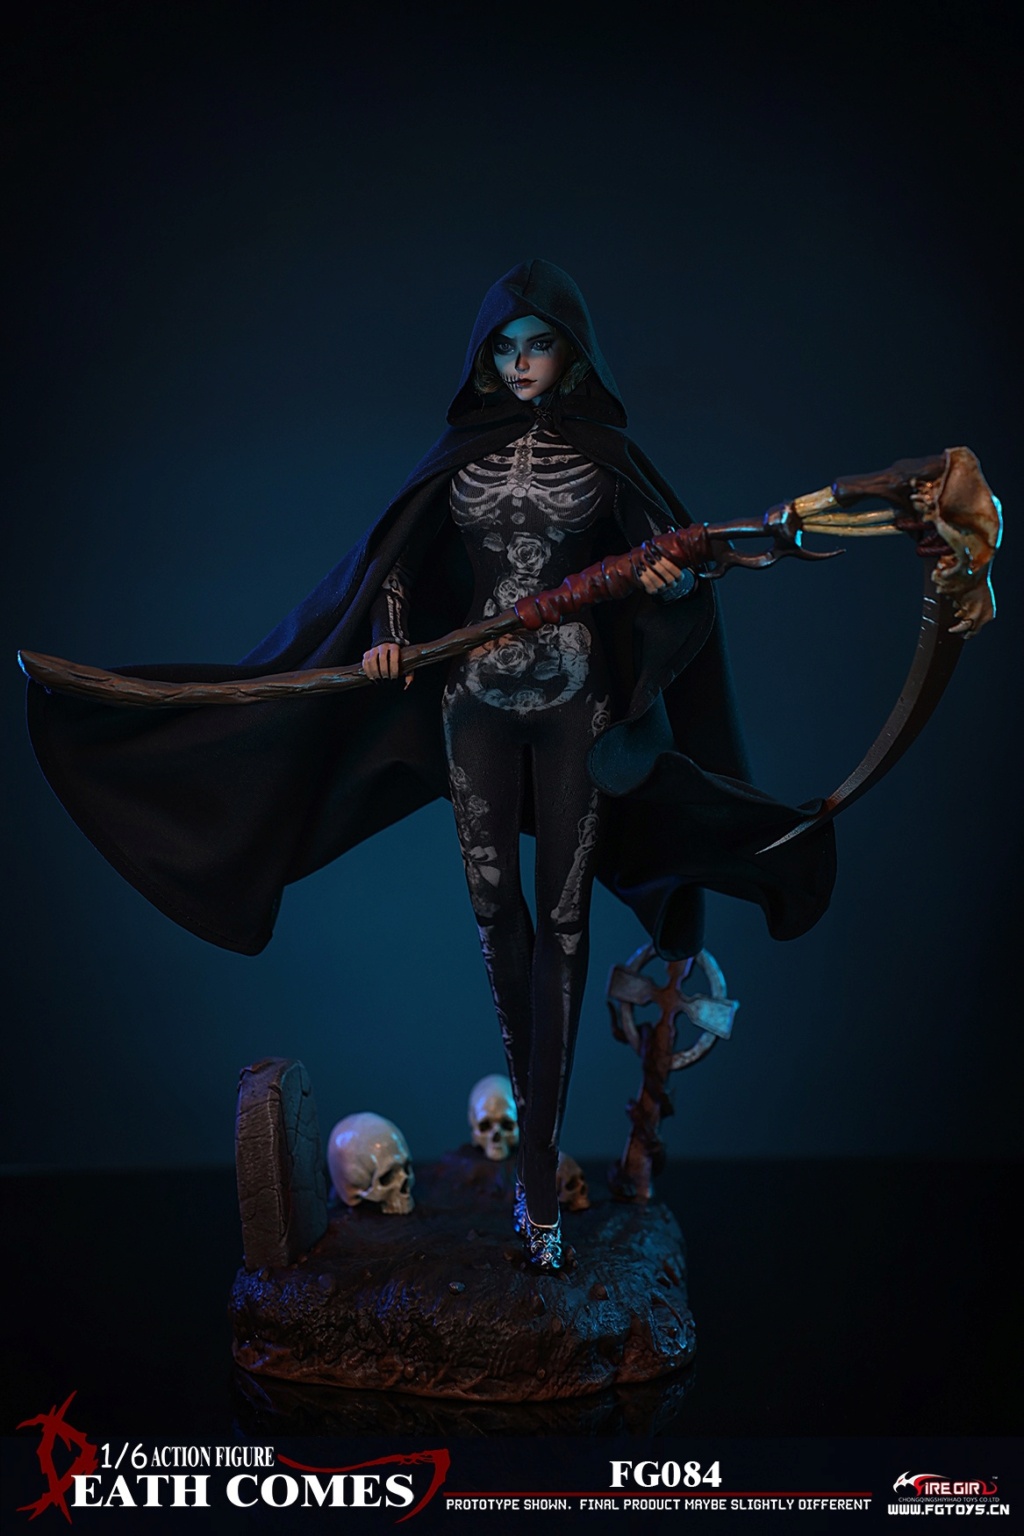 fantasy - NEW PRODUCT: Fire Girl Toys: 1/6 Death Comes #FG084 female 18101013